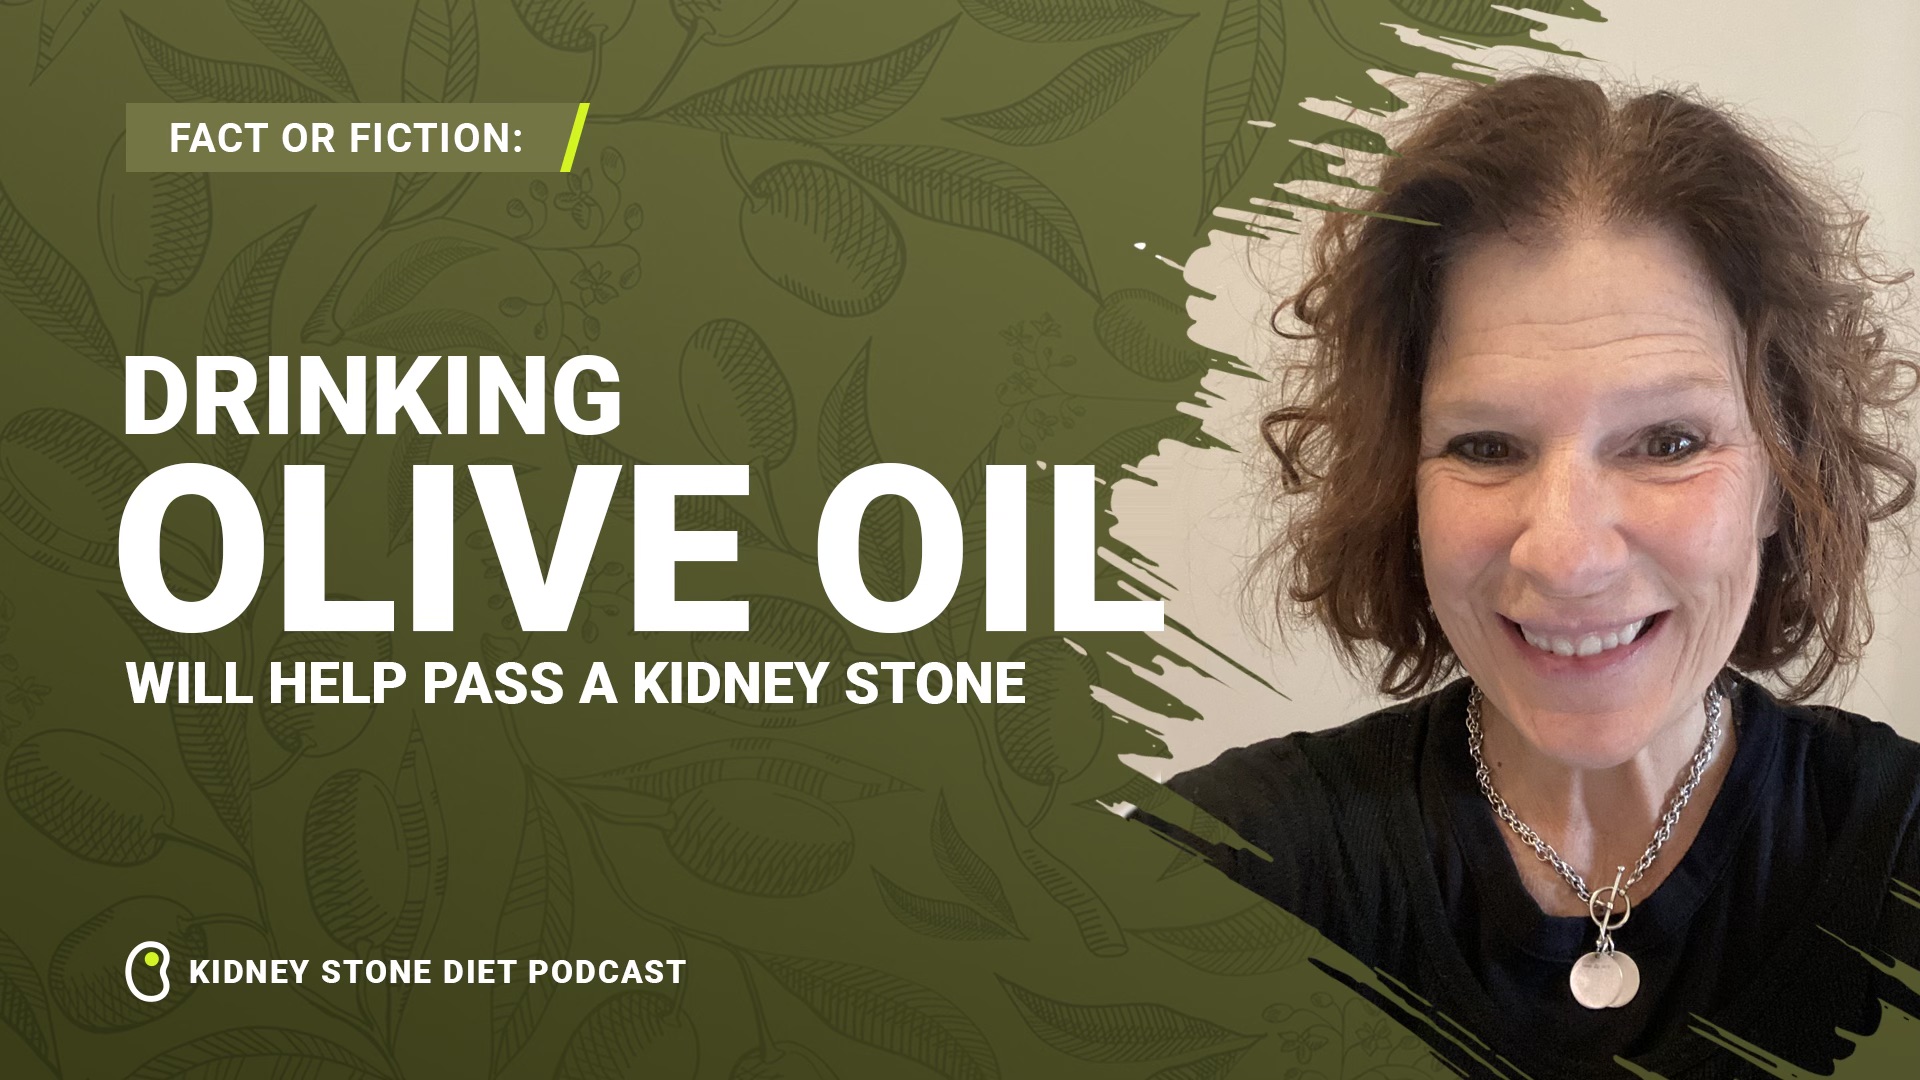 Fact or Fiction: Drinking olive oil will help pass a kidney stone